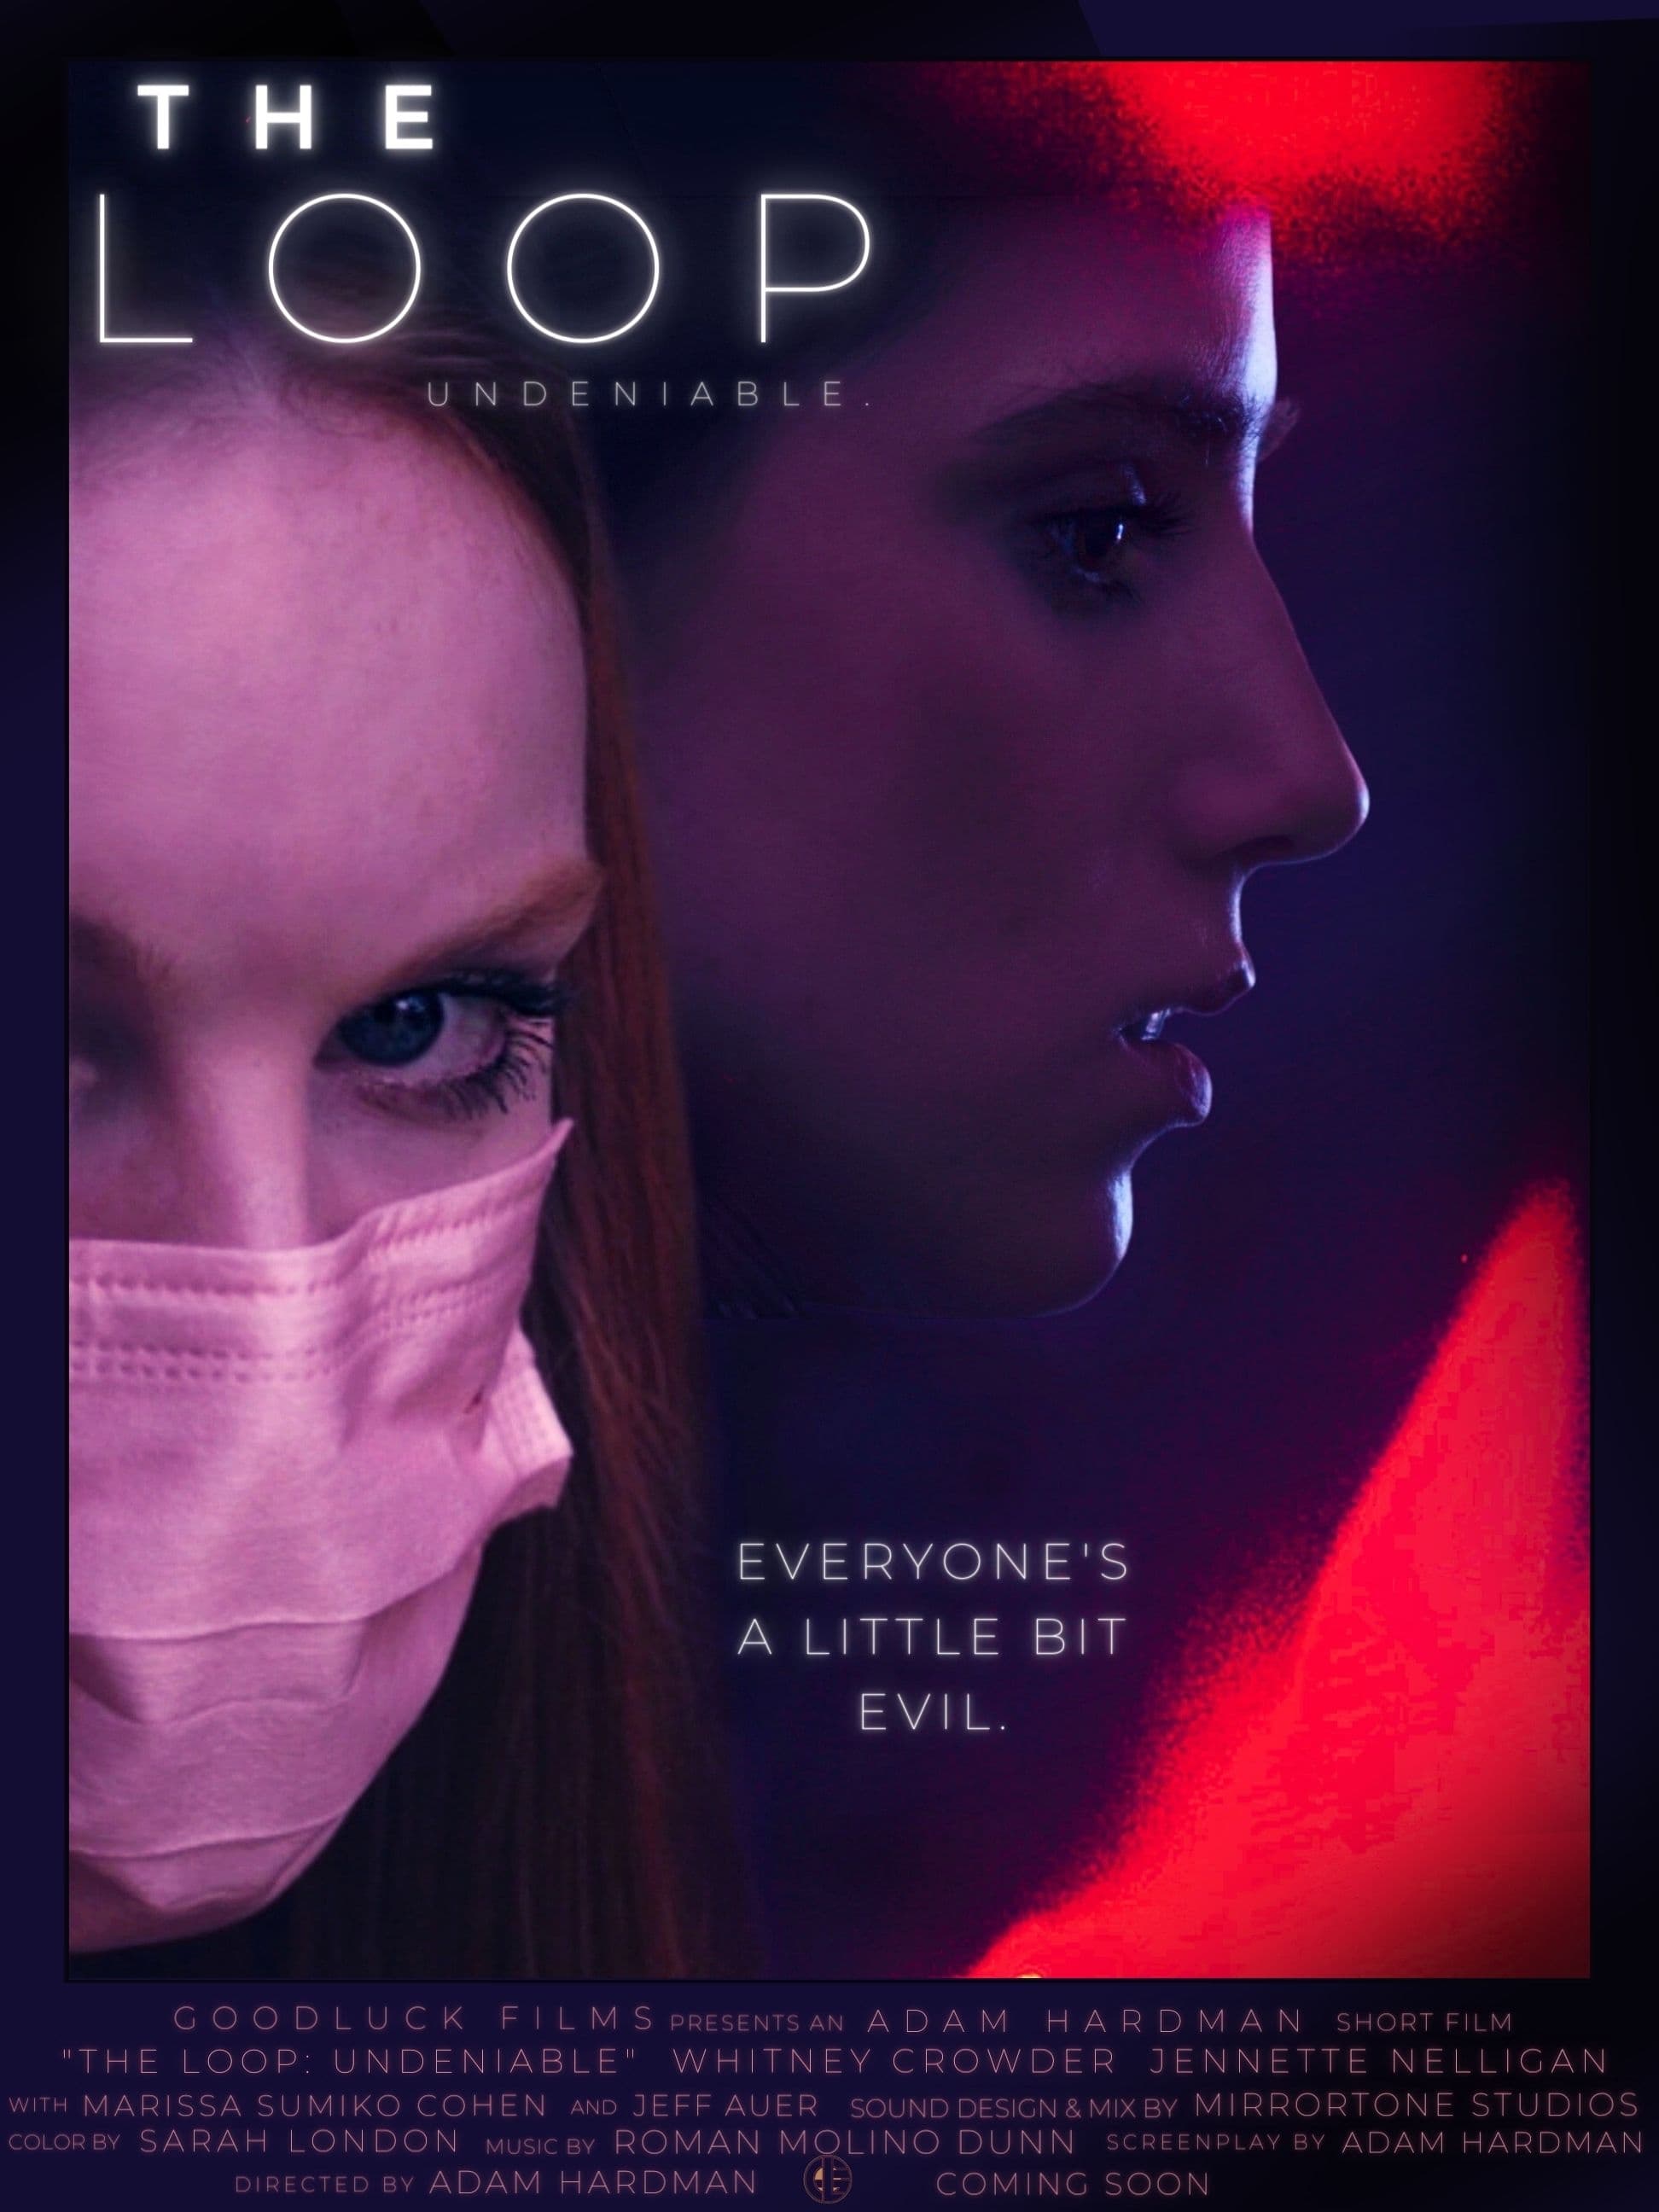 The Loop: Undeniable